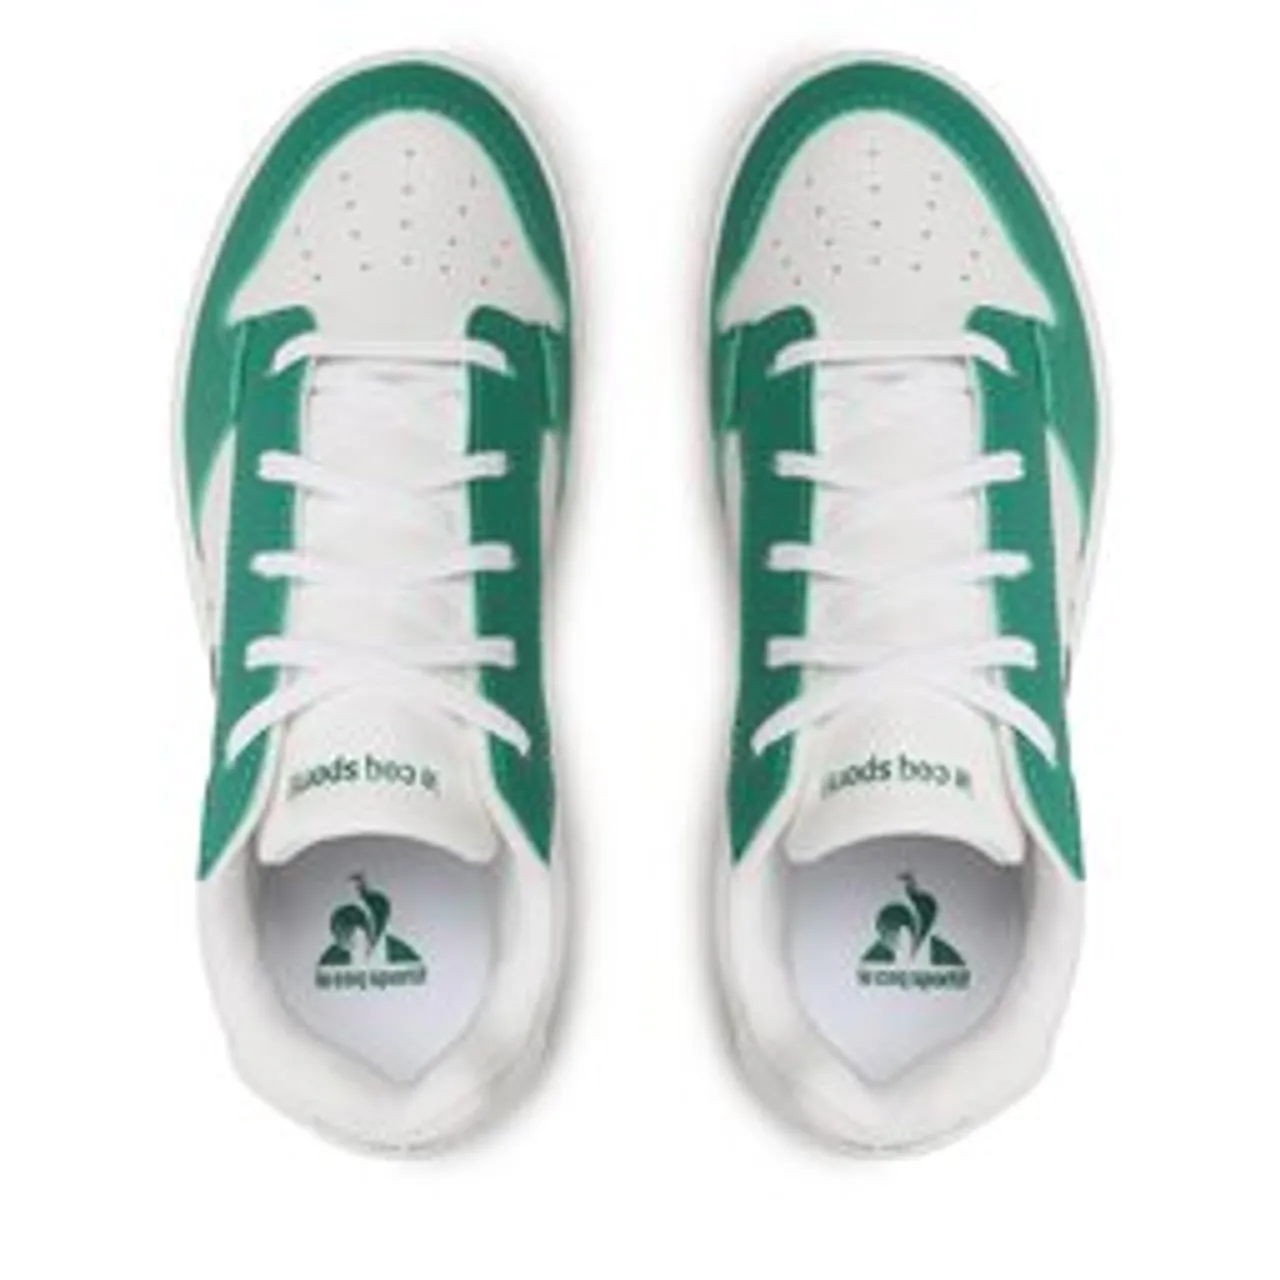 Sneakers Le Coq Sportif Breakpoint Gs Sport 2310248 Optical White/Vert Clair